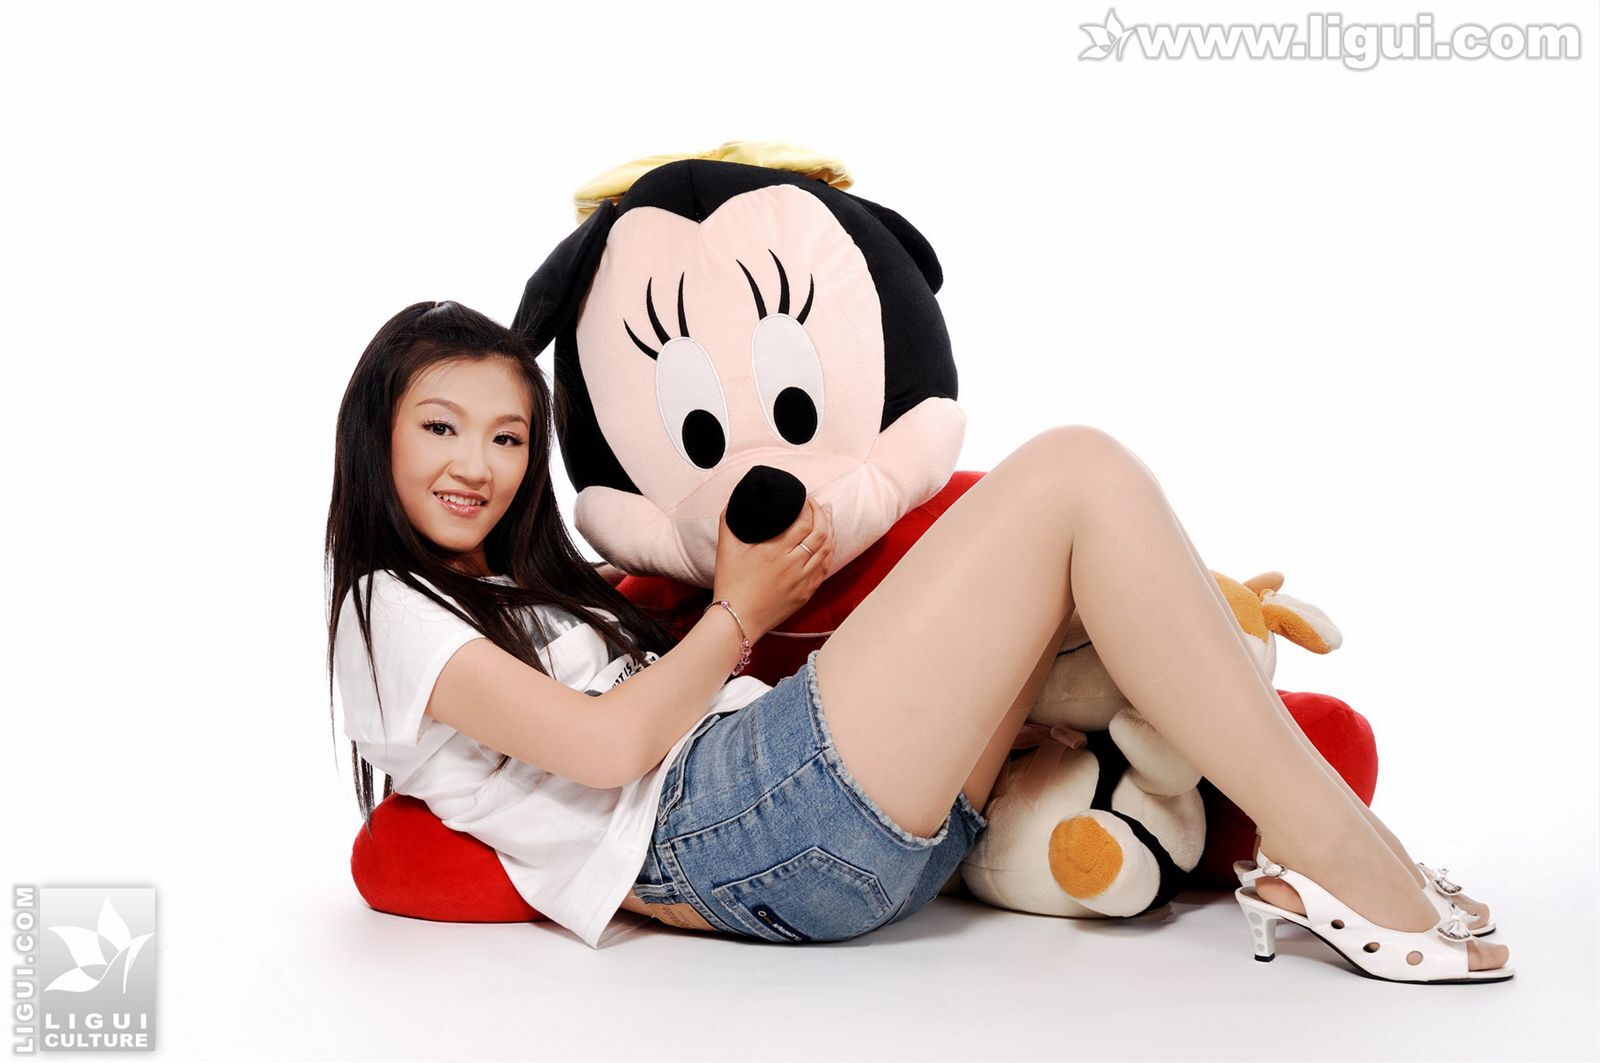 Xiaoqian and the doll